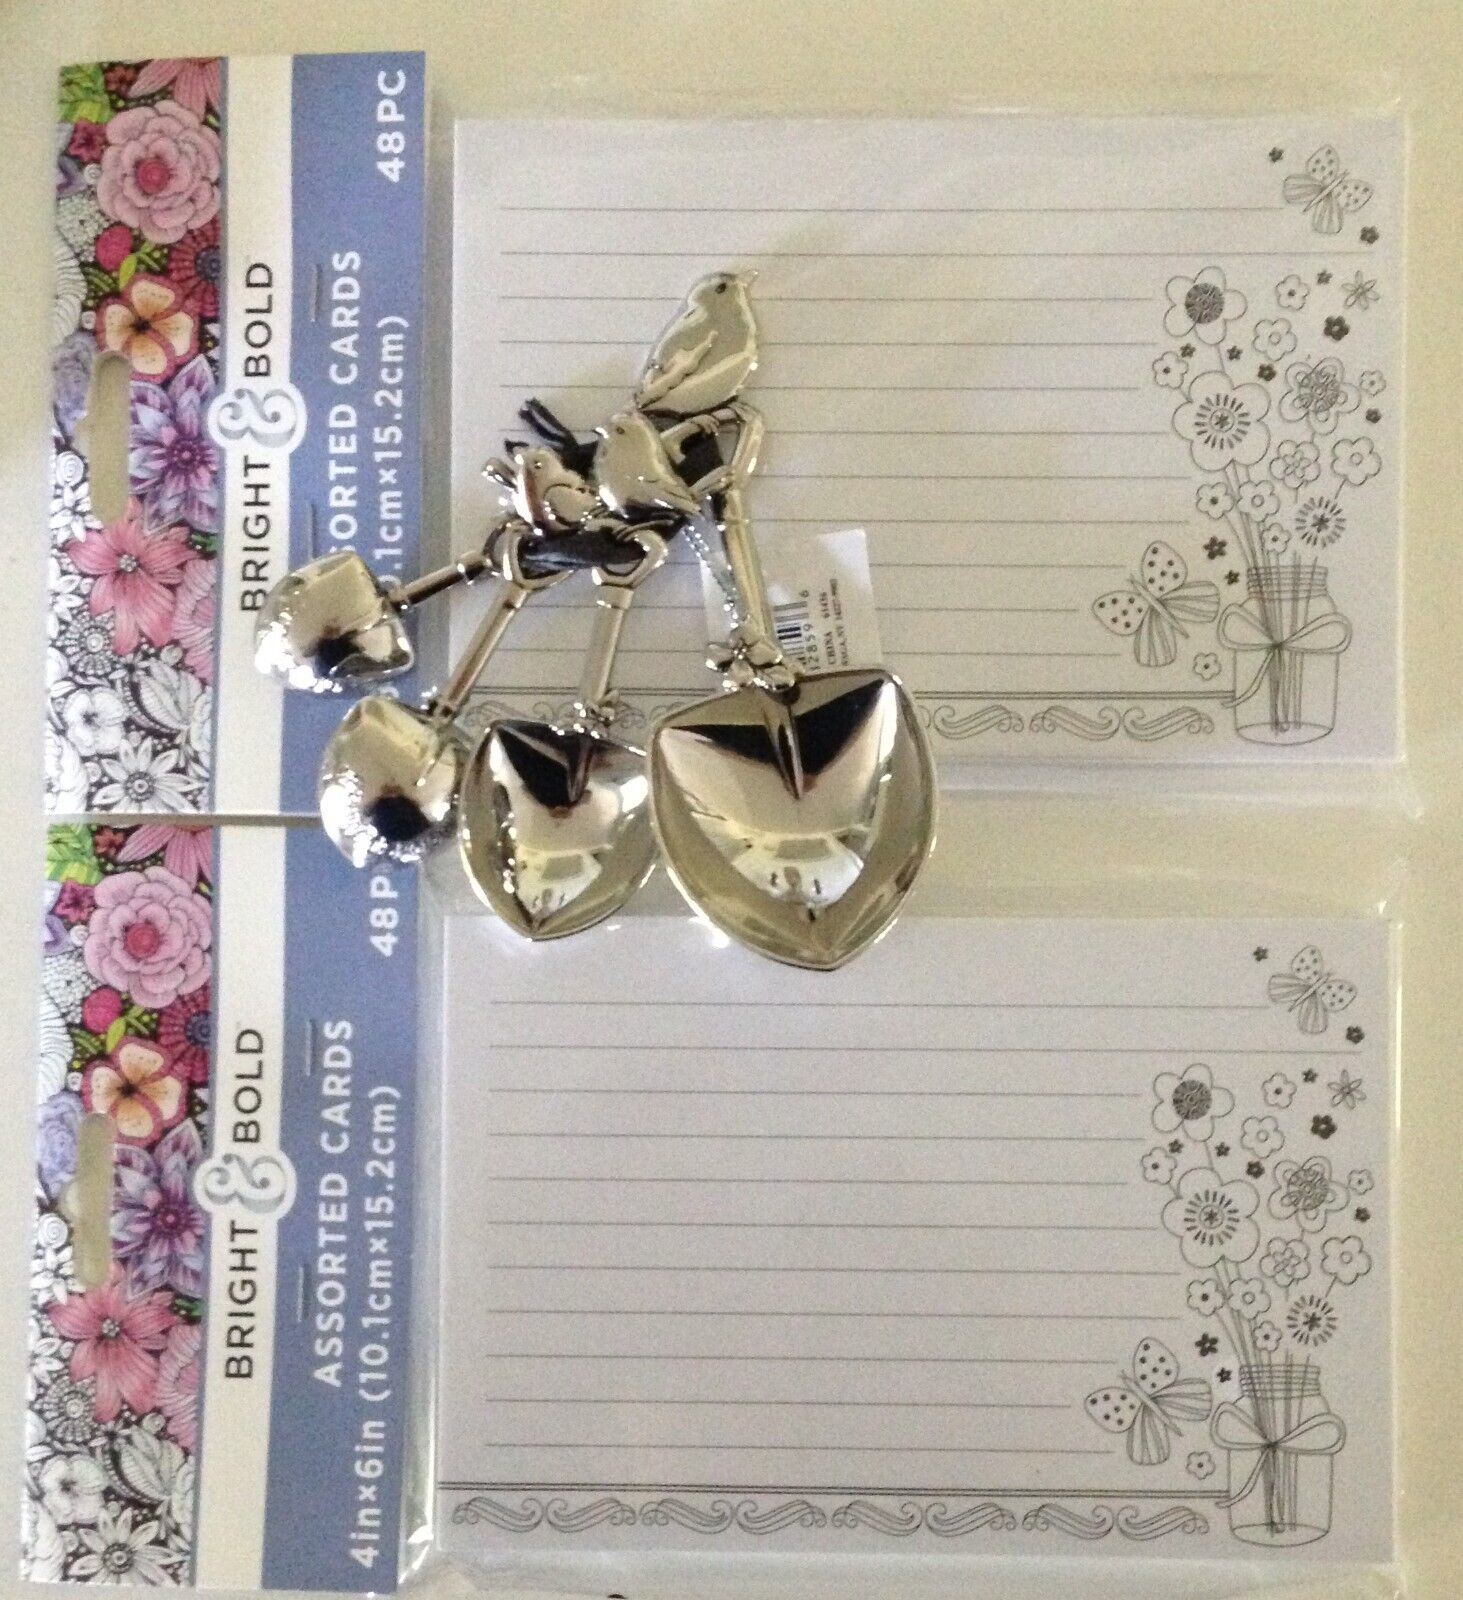 Primary image for Pretty Bird Studio 101 Stainless Steel Measuring Spoons & 98 Recipe Cards Lot